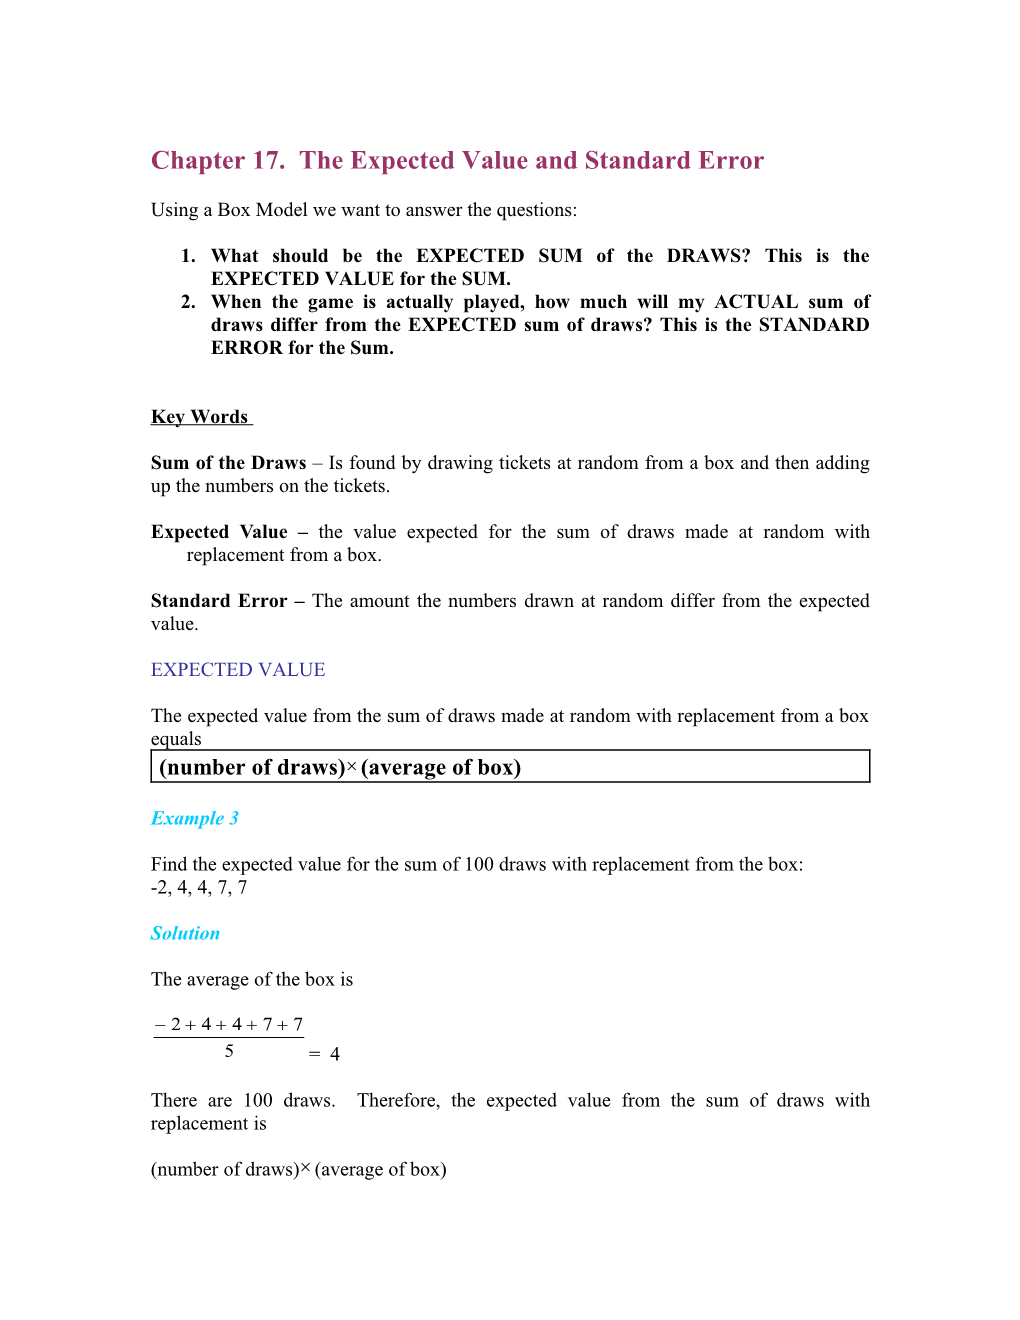 Chapter 17. the Expected Value and Standard Error